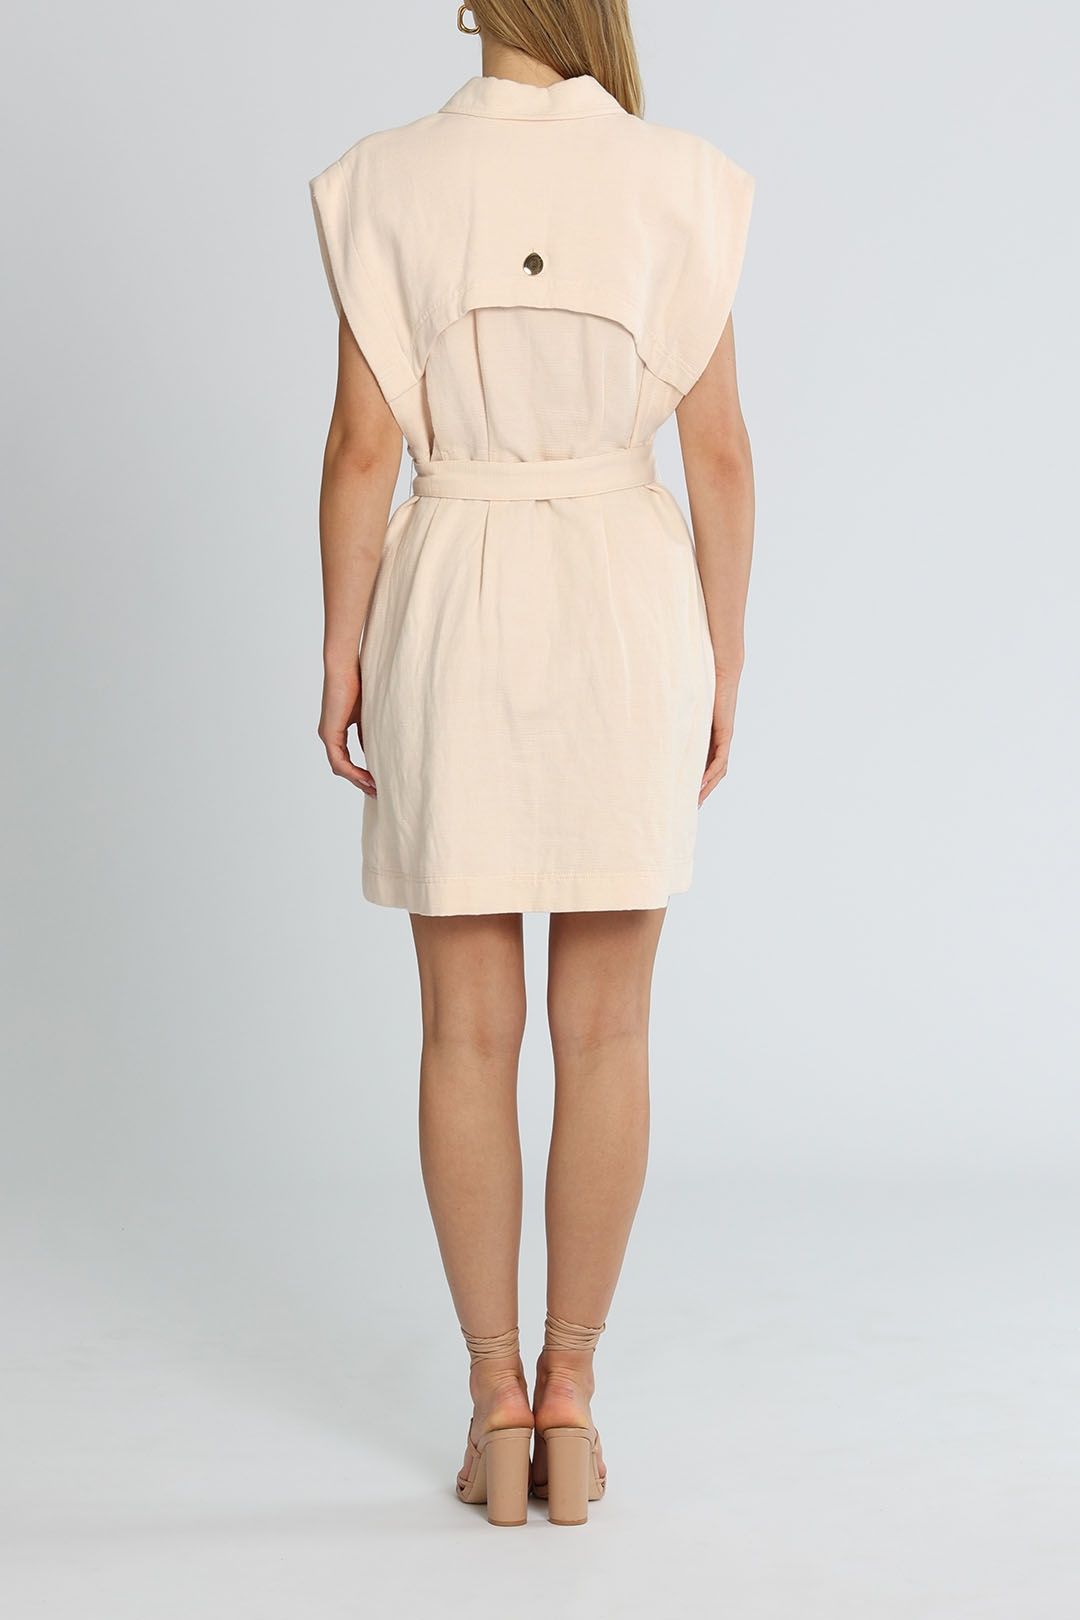 Acler Westcroft Dress in Blush With Belt